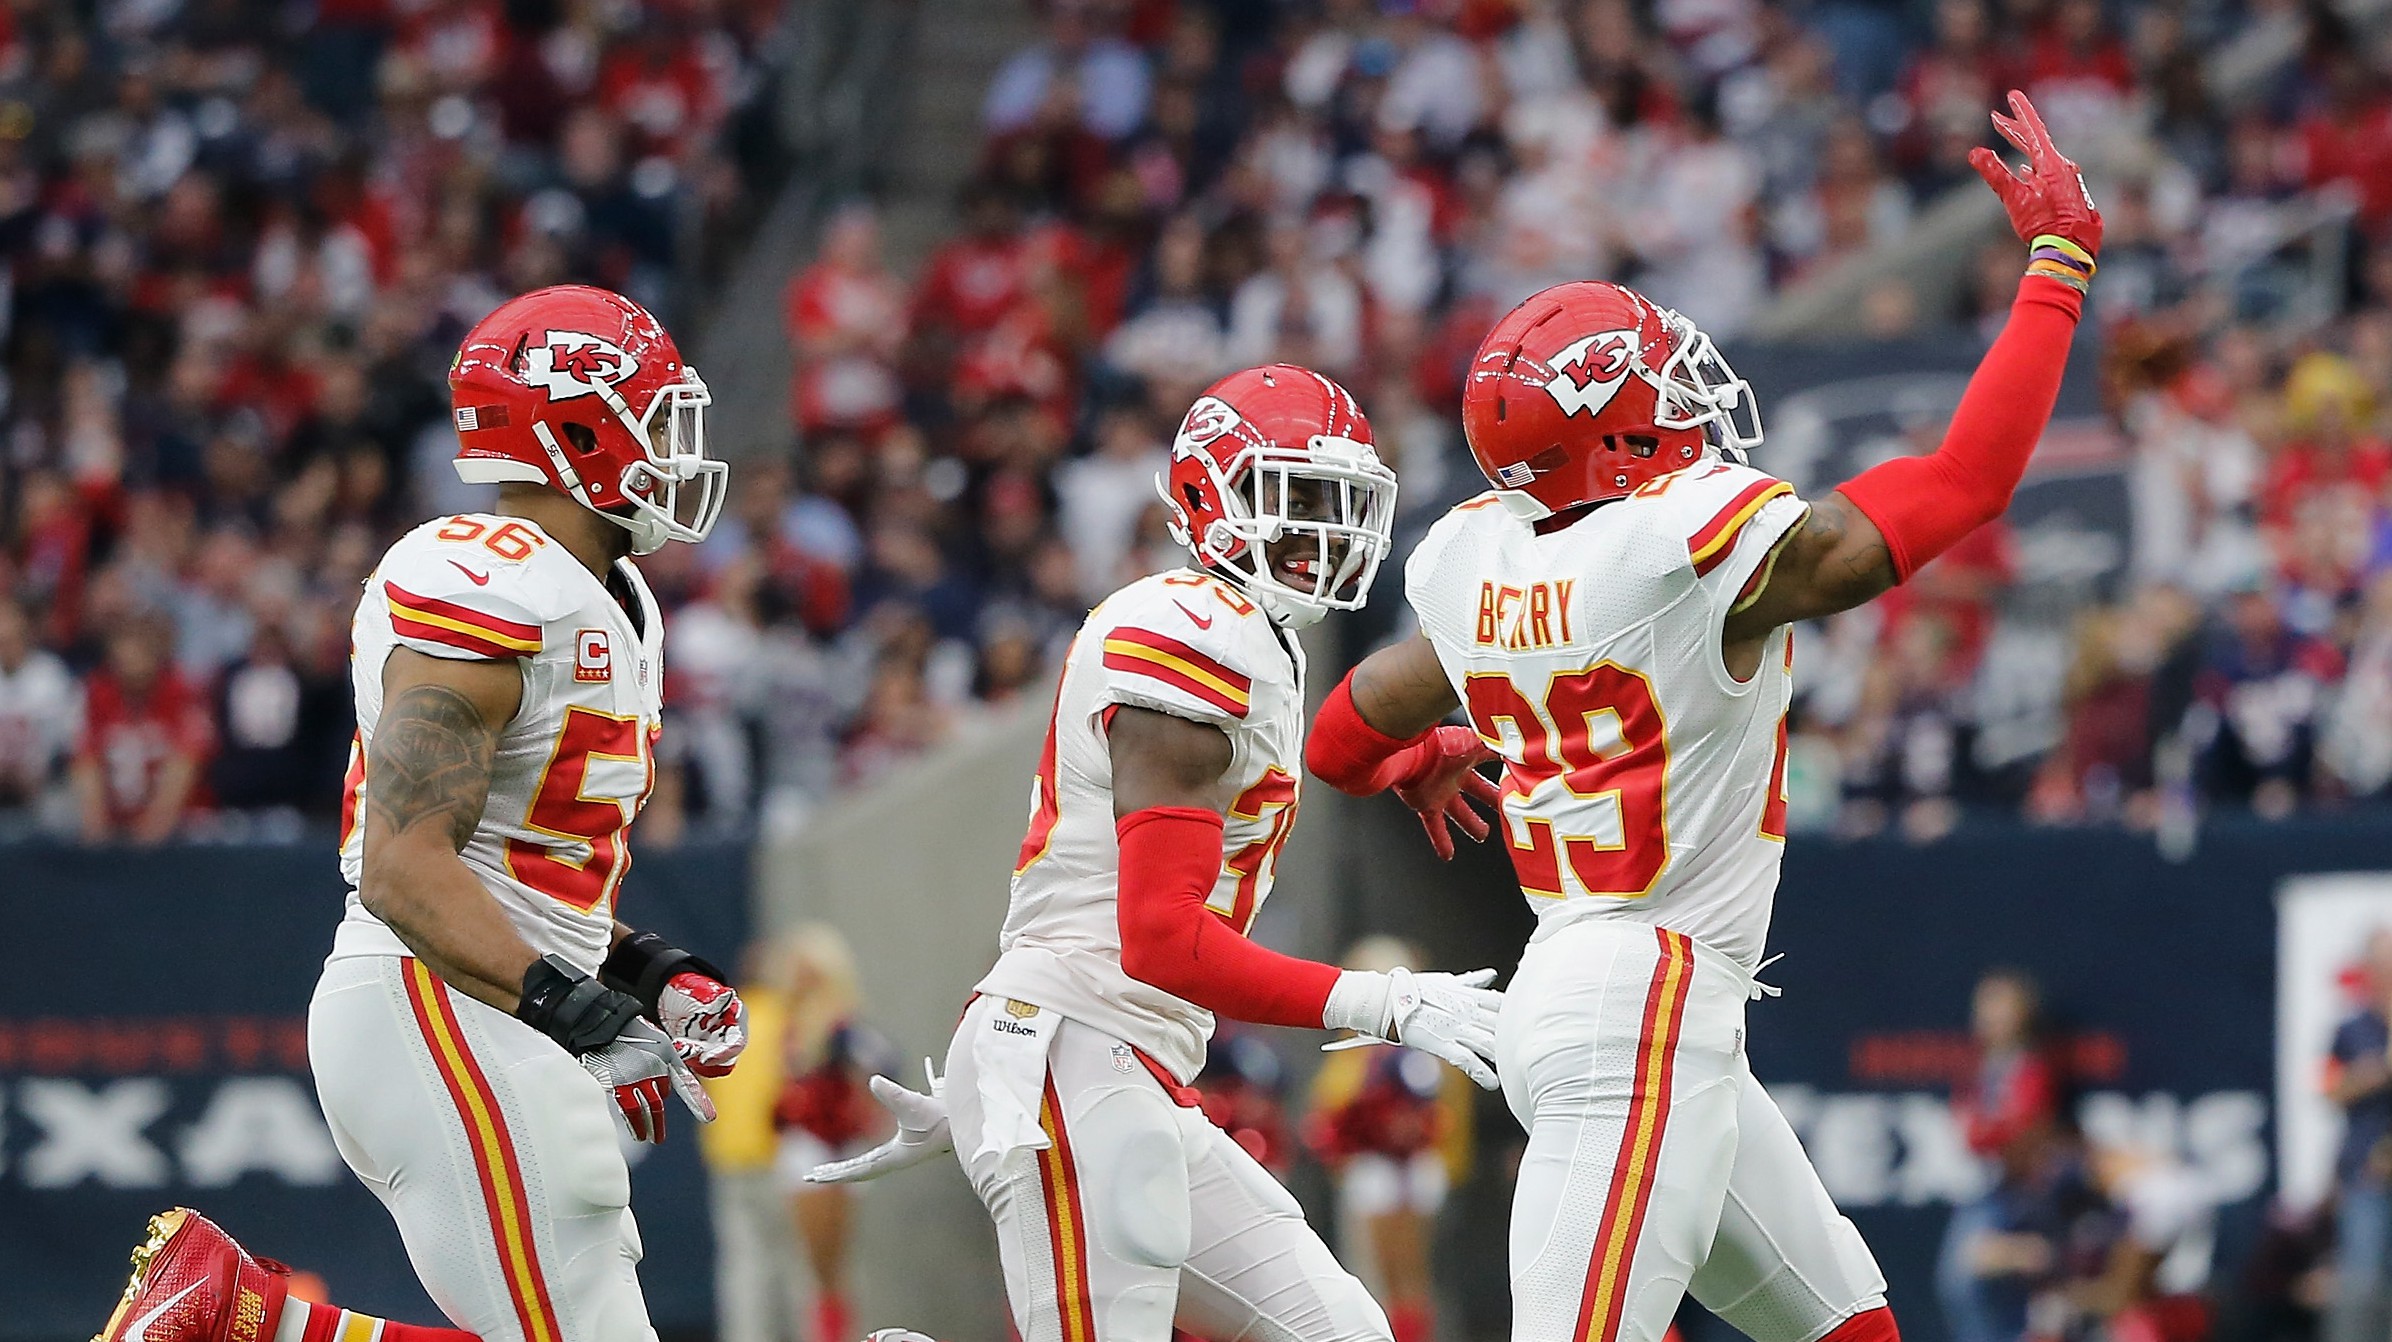 Who Do the Chiefs Play Next in the Playoffs?